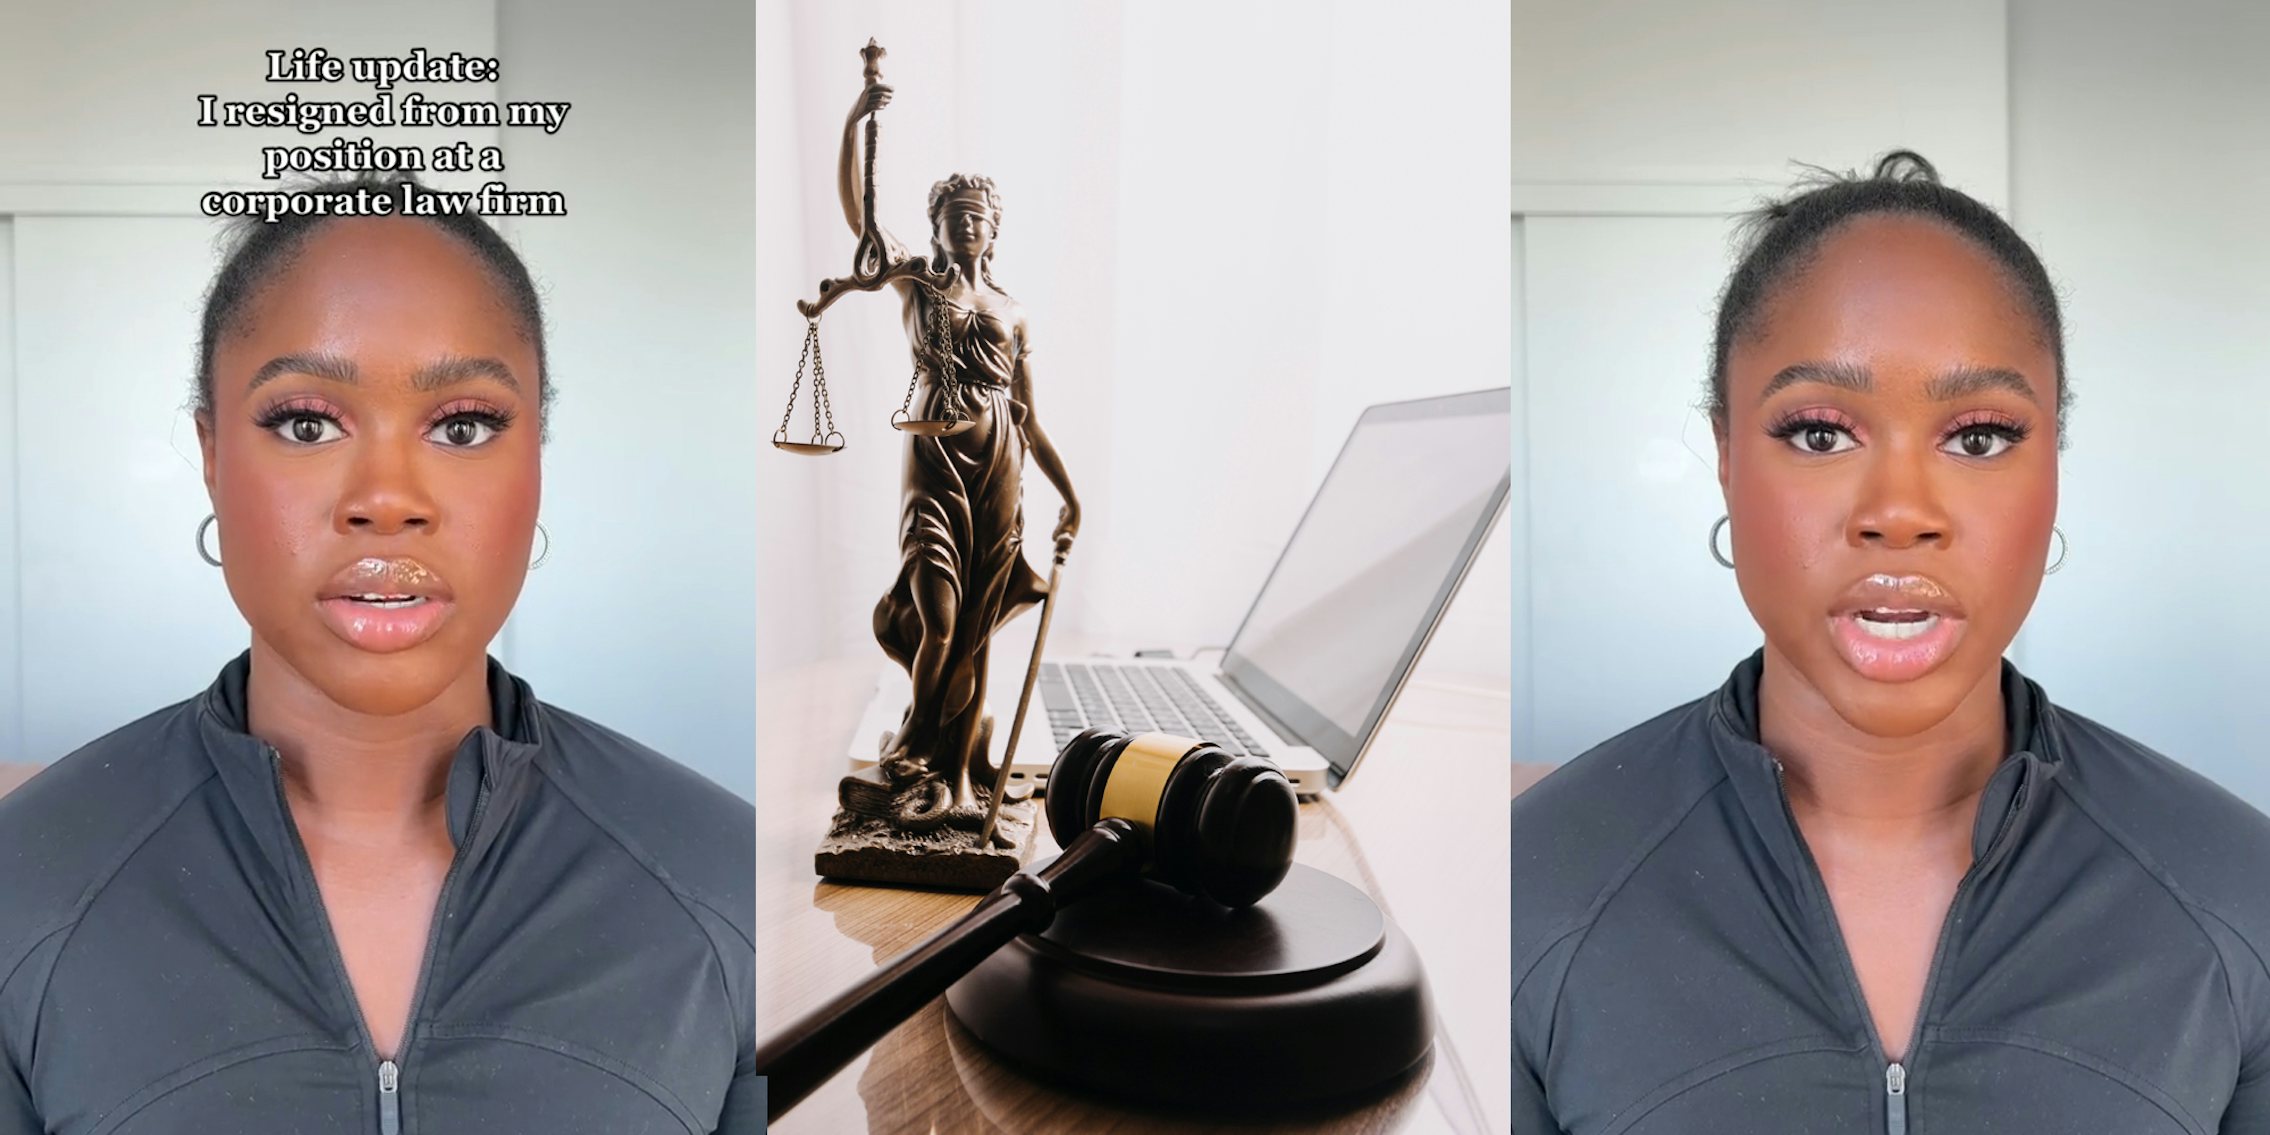 attorney speaking with caption 'Life update: I resigned form my corporate law firm' (l) statue of justice with wooden gavel and laptop in office (c) attorney speaking (r)